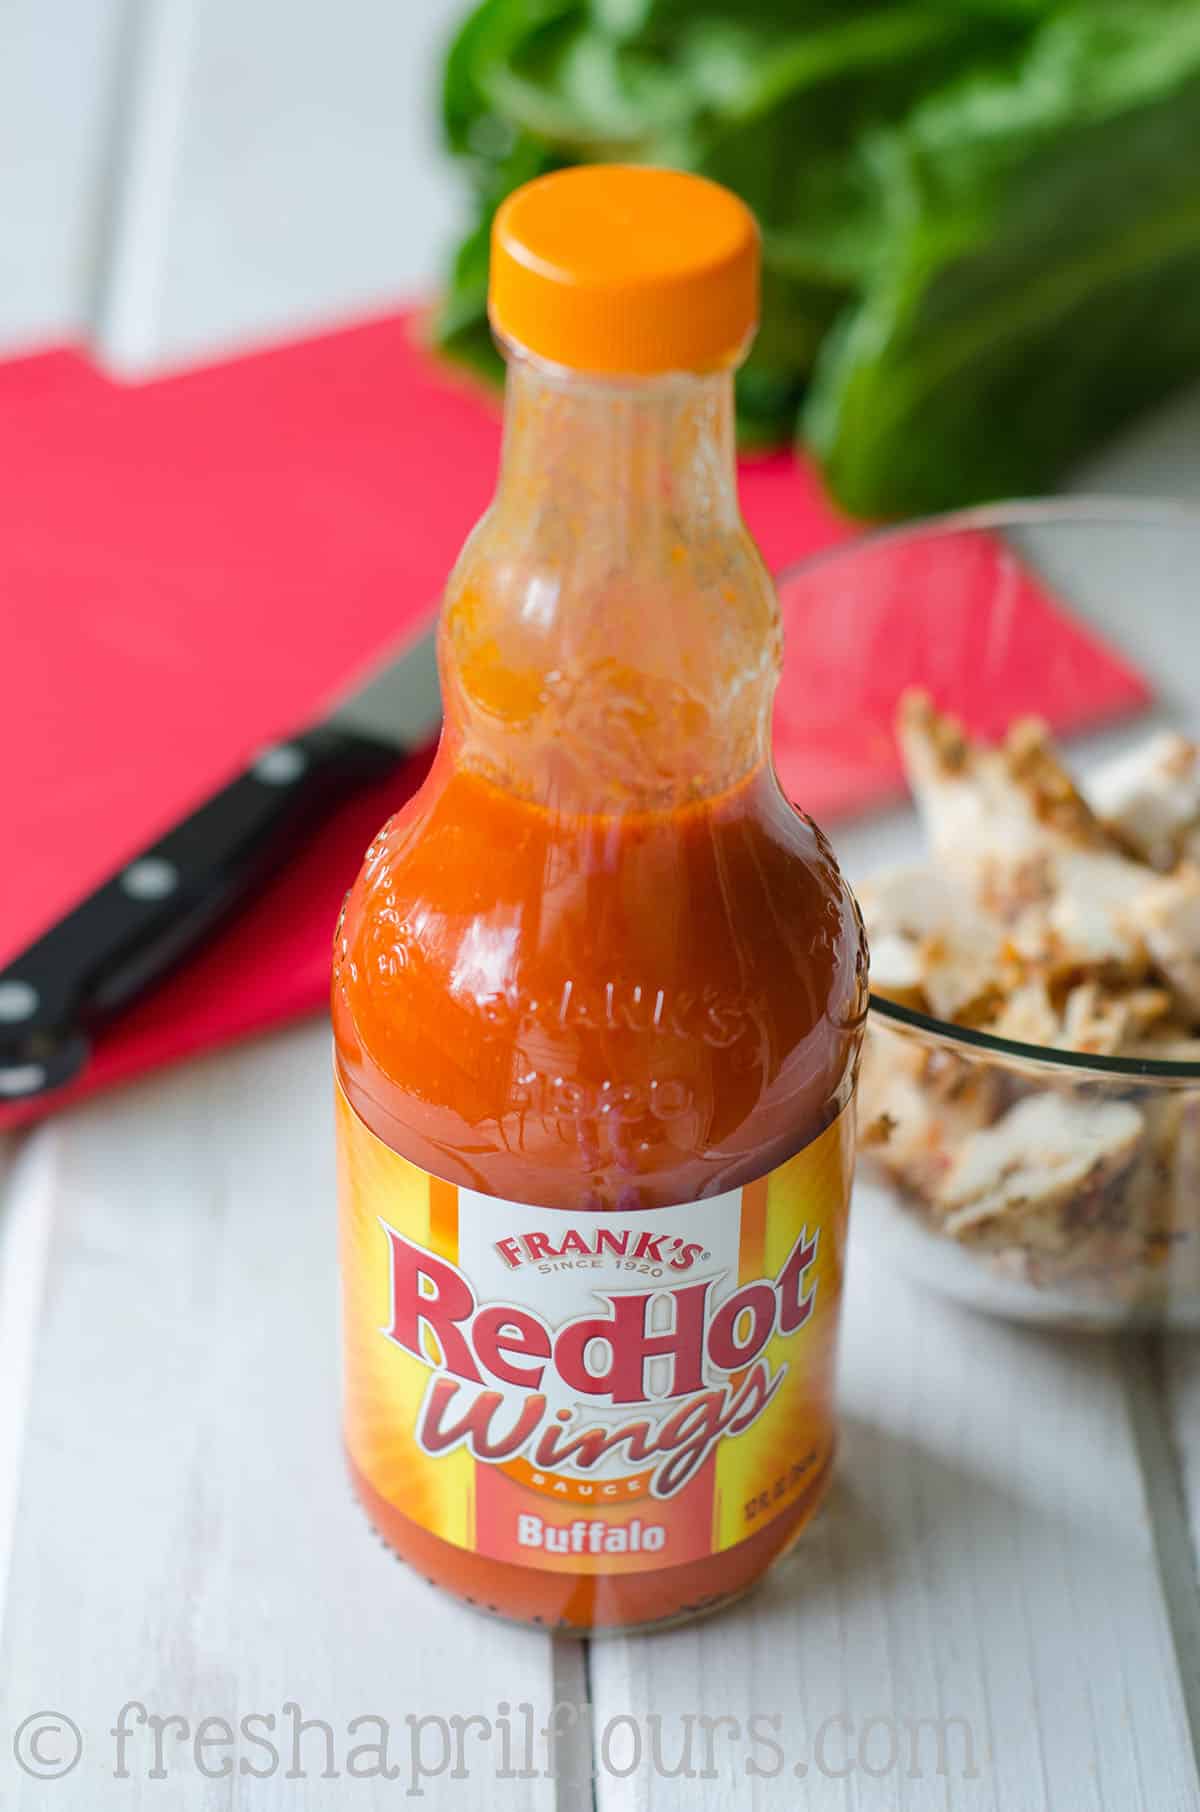 A bottle of Franks RedHot wing sauce.